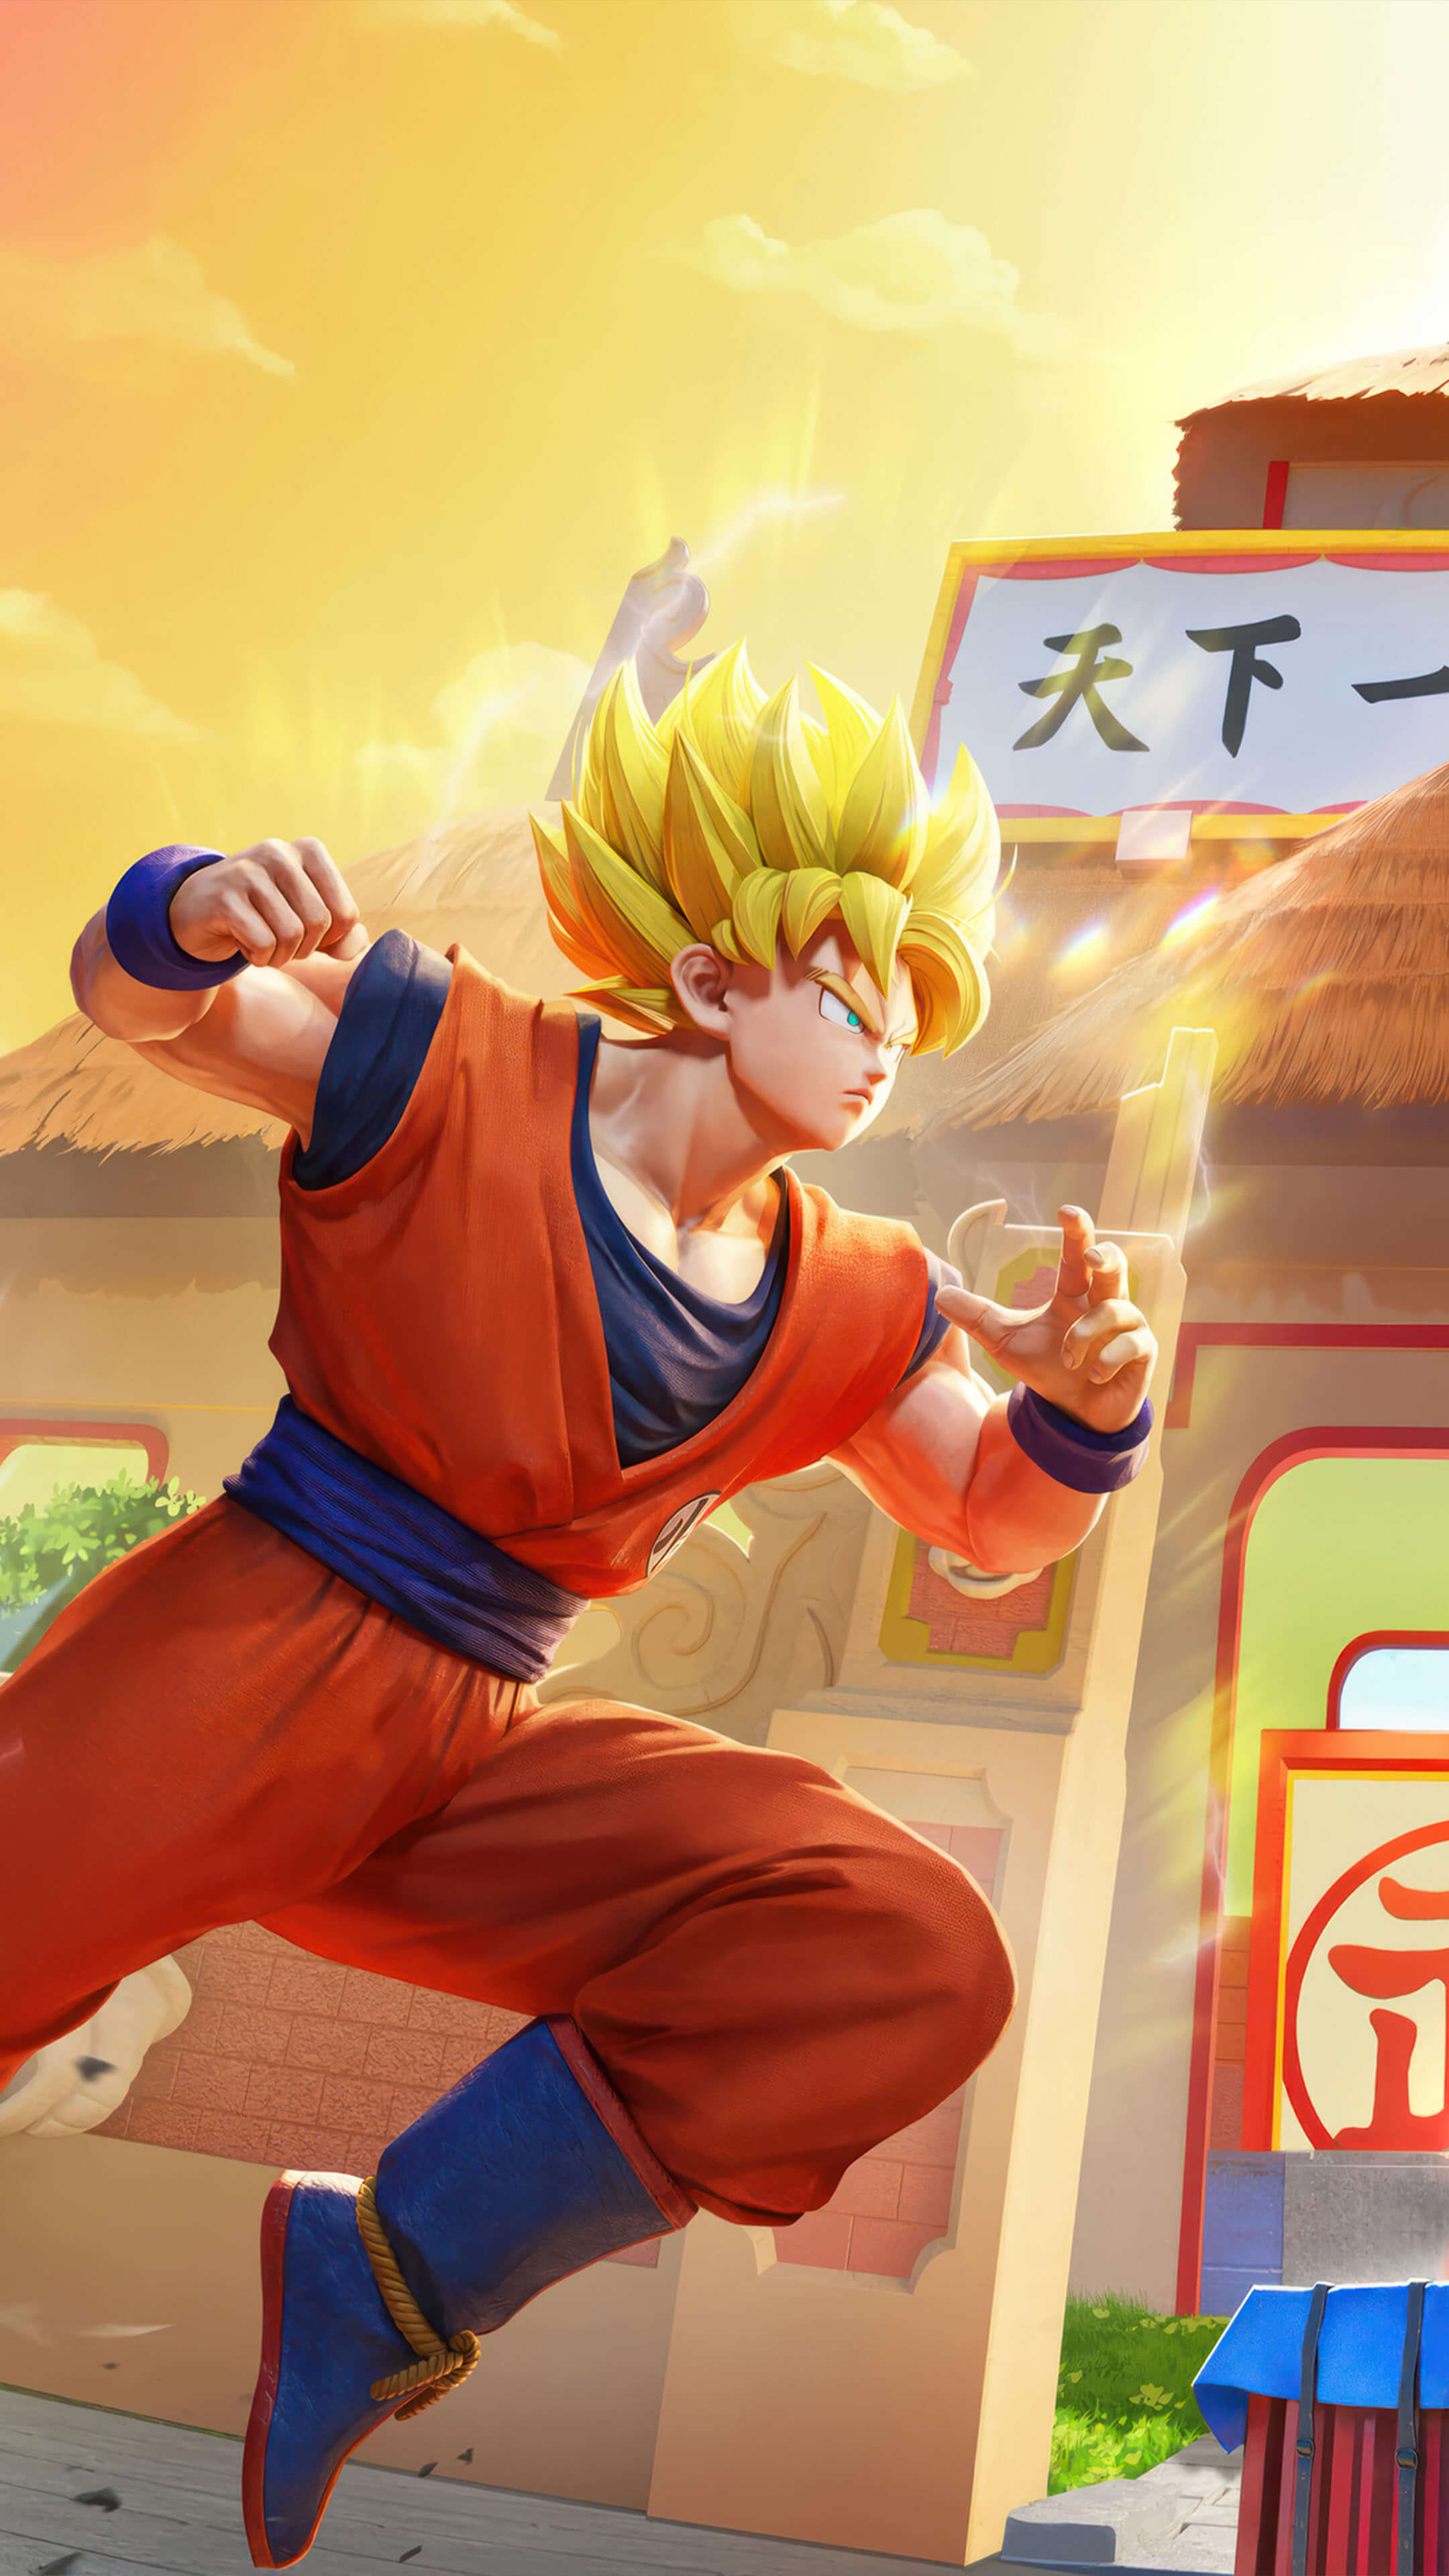 Download Dragon Ball Super wallpapers for mobile phone, free